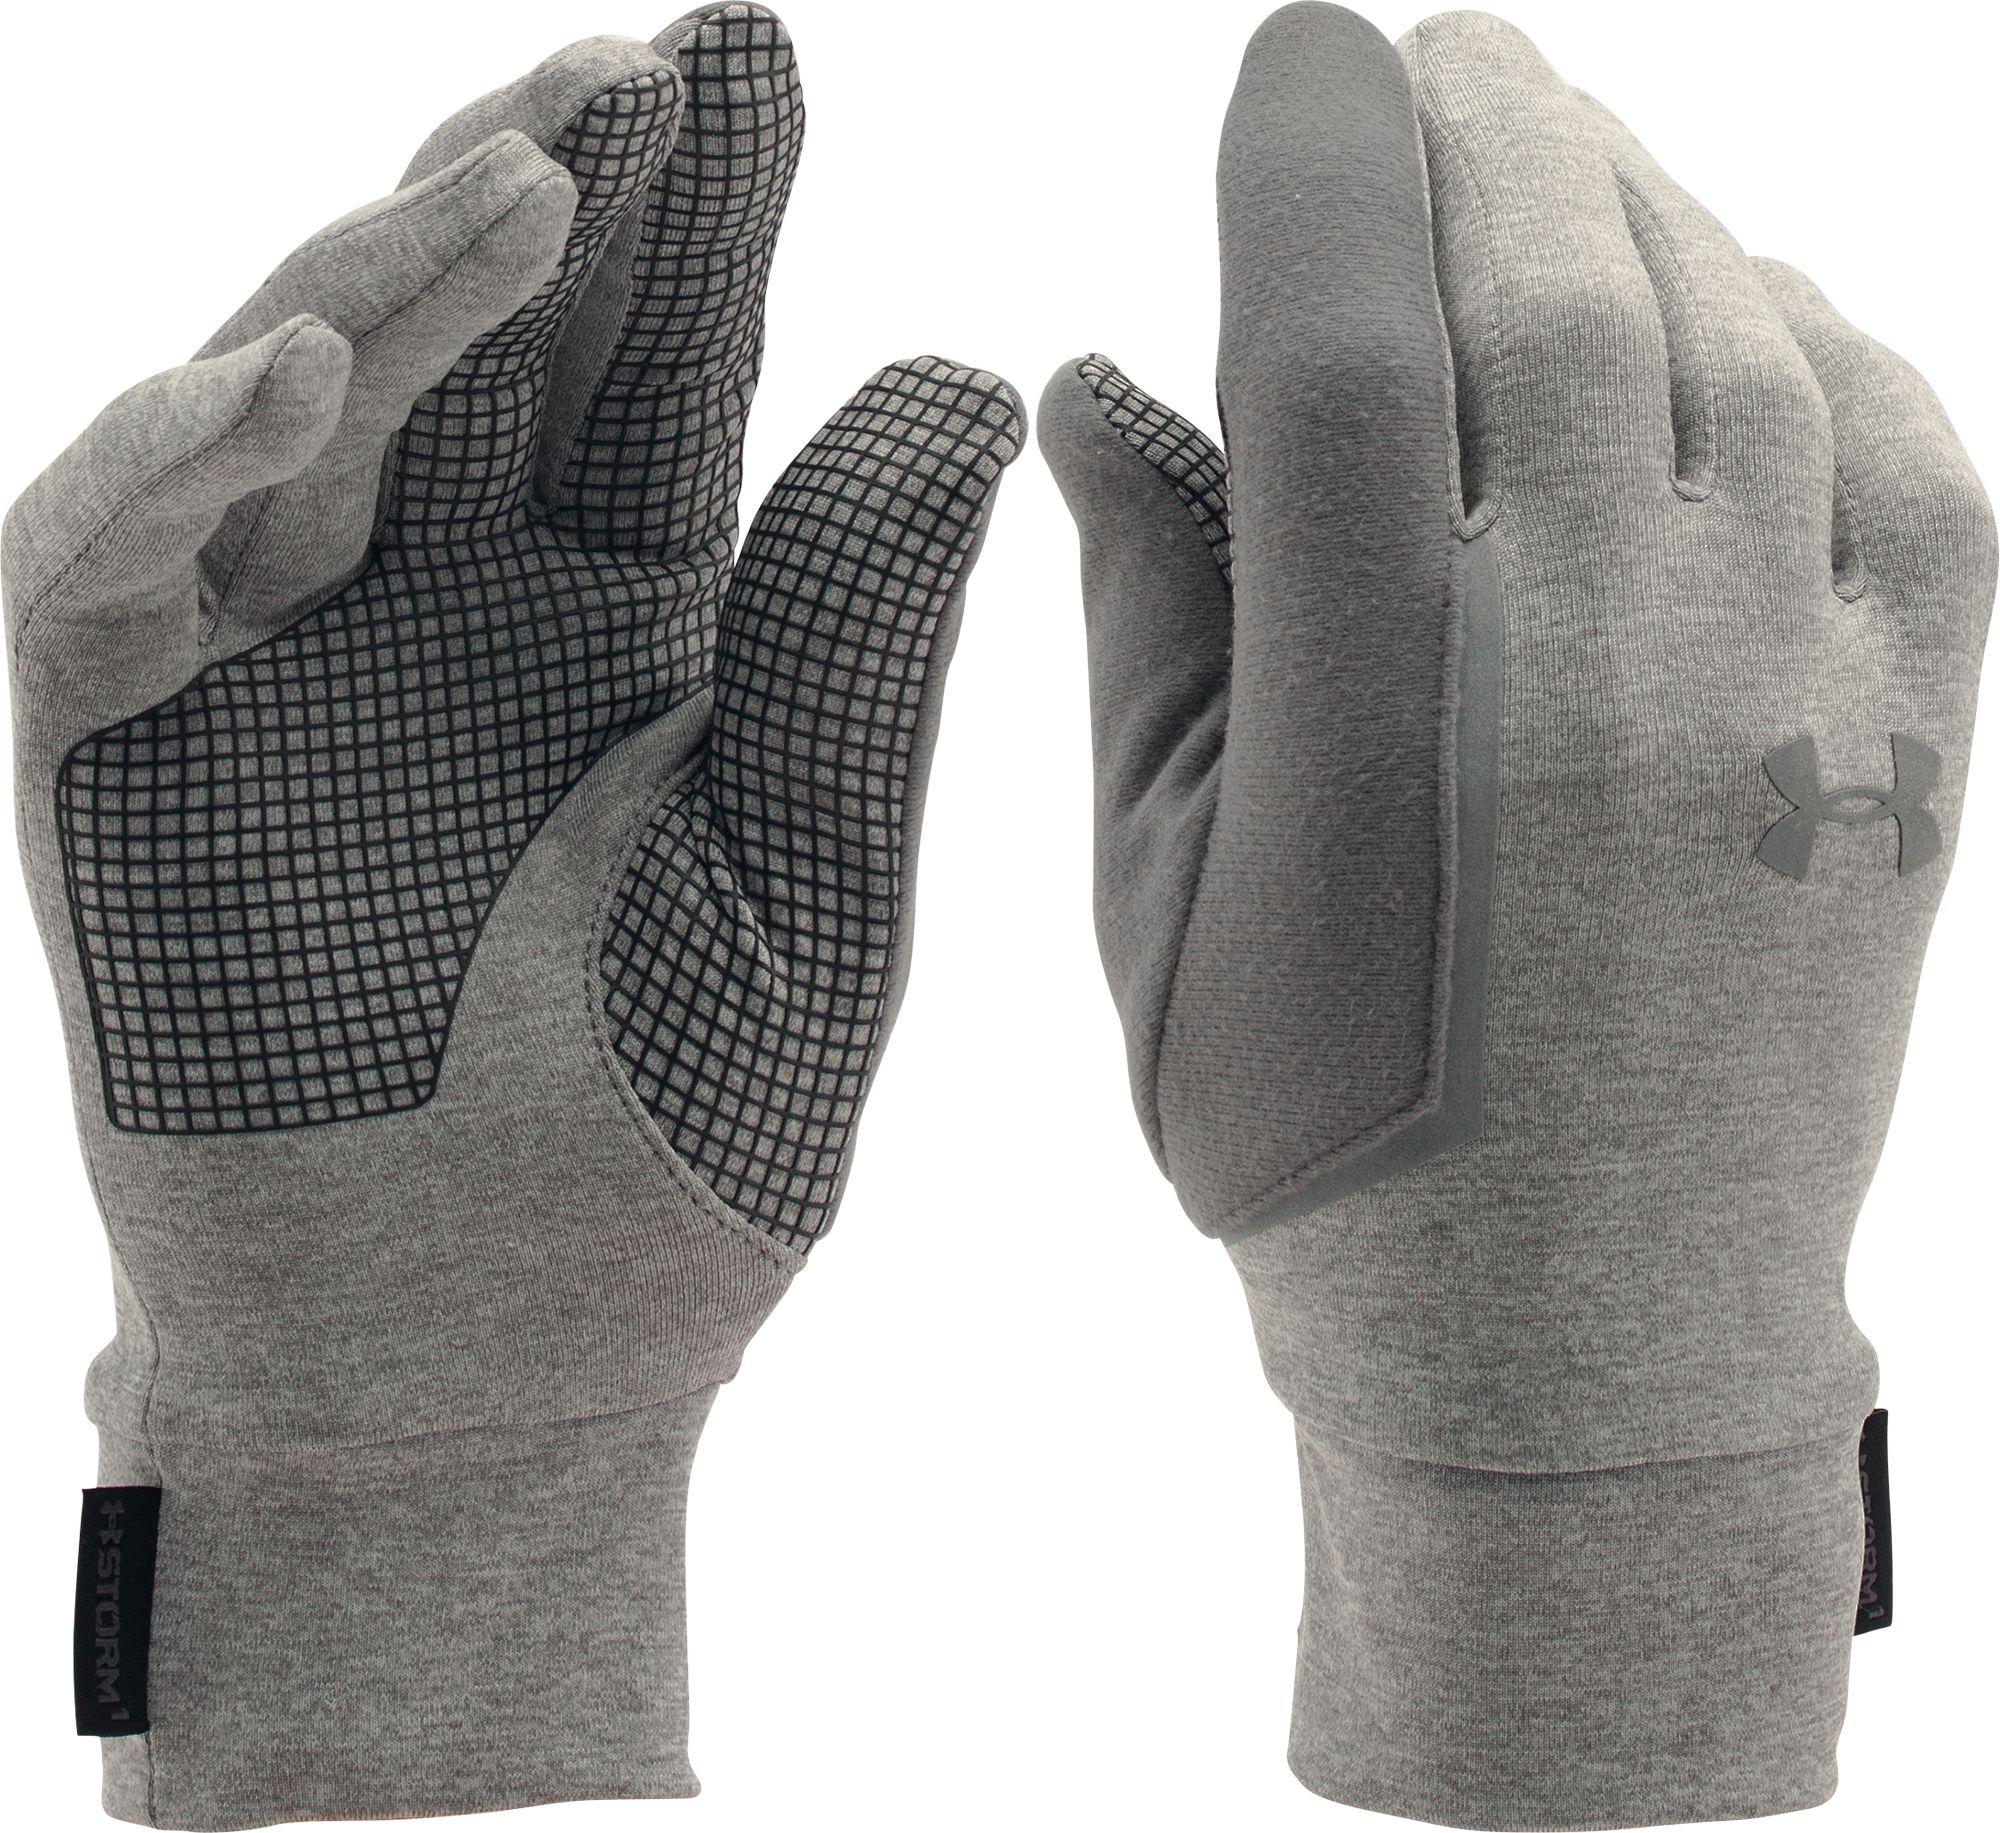 UNDER ARMOUR No Breaks Armour Liner Glove 2772 | lupon.gov.ph